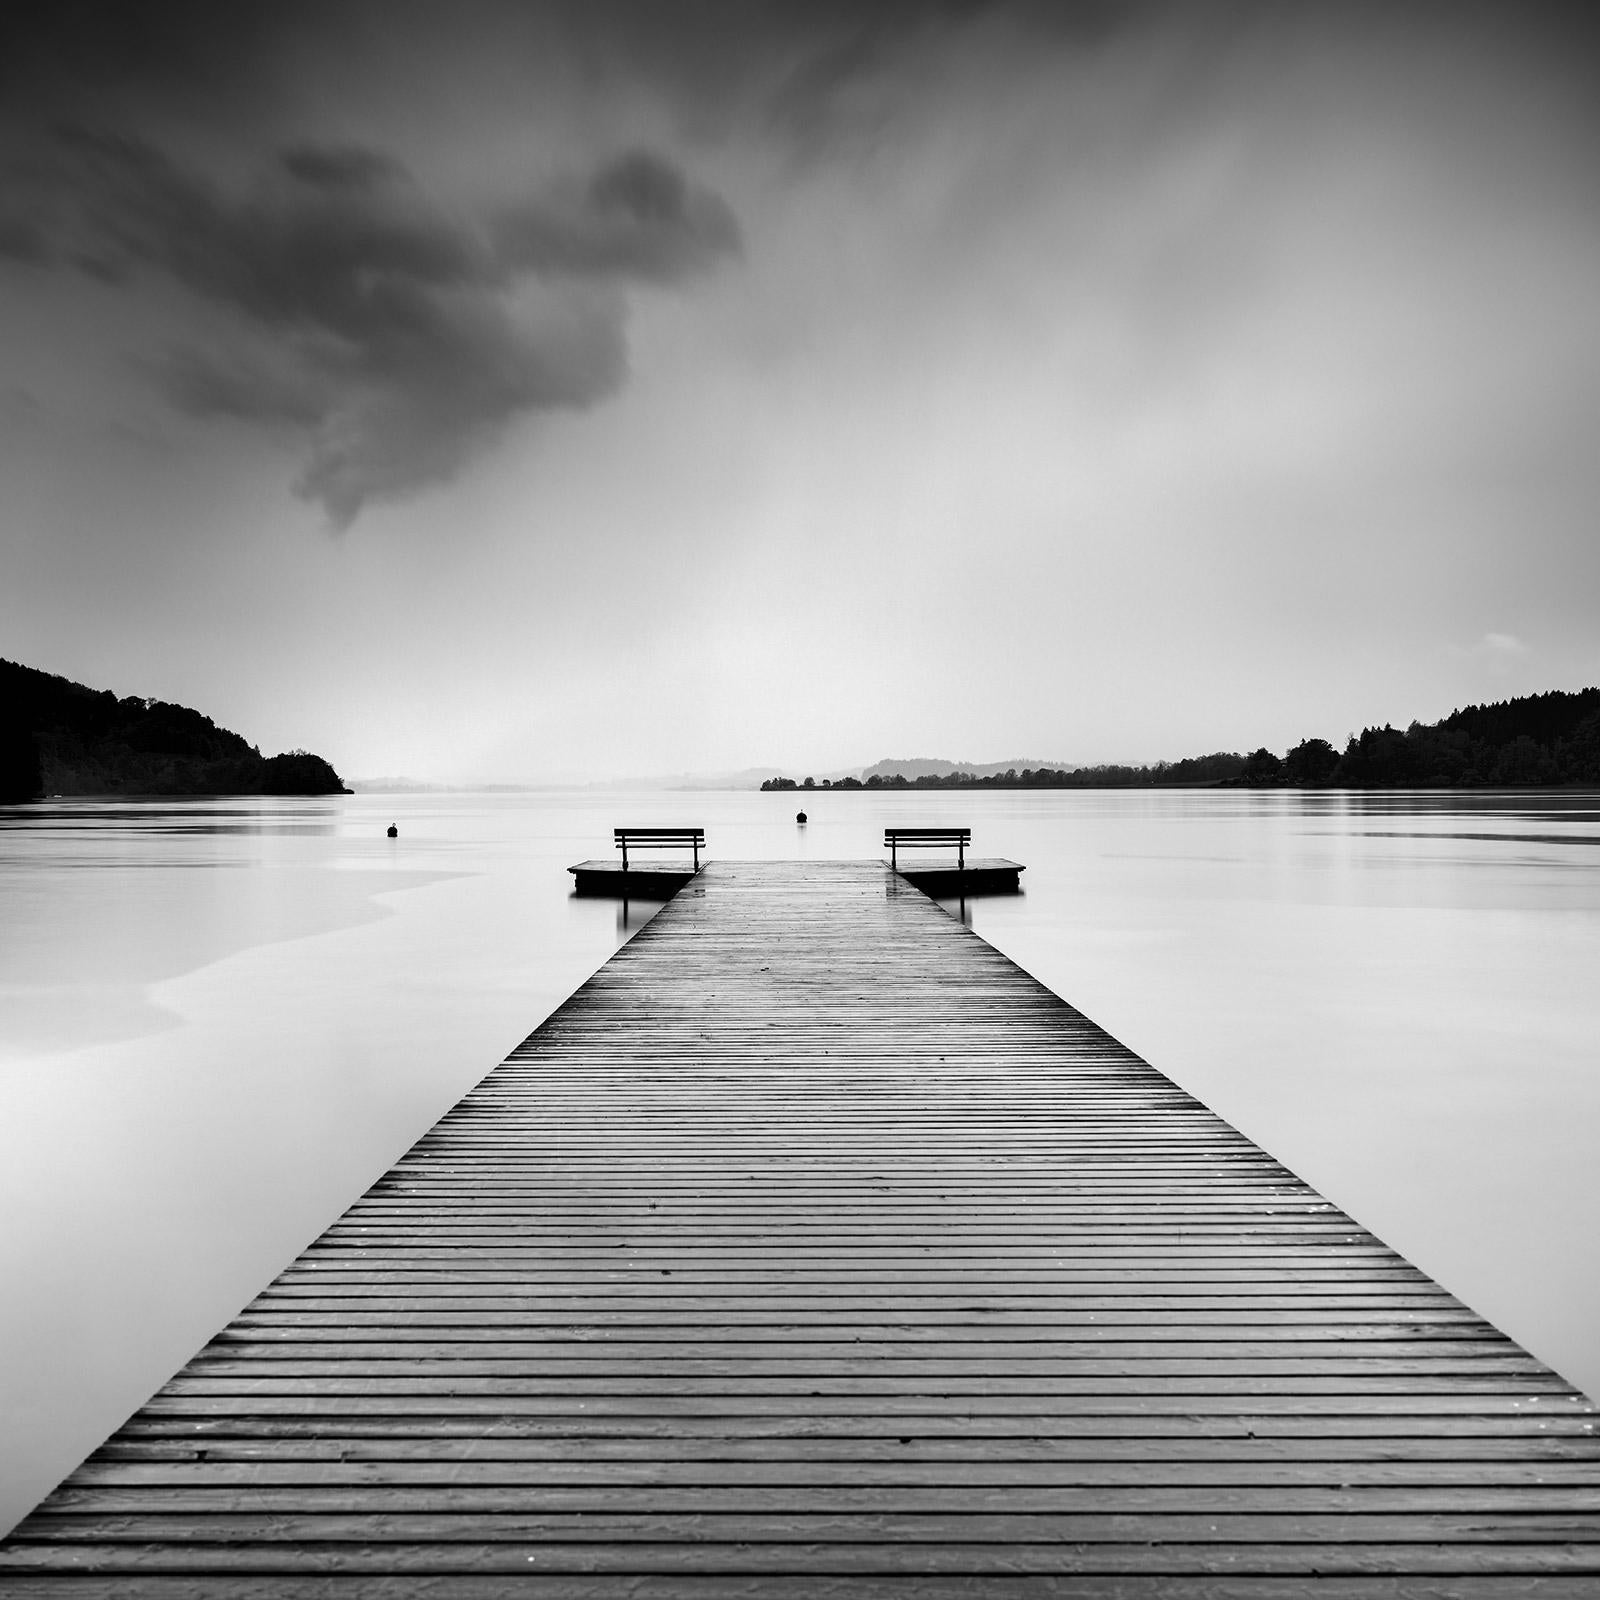 Lakeside wooden Jetty, black and white long exposure art landscape photography